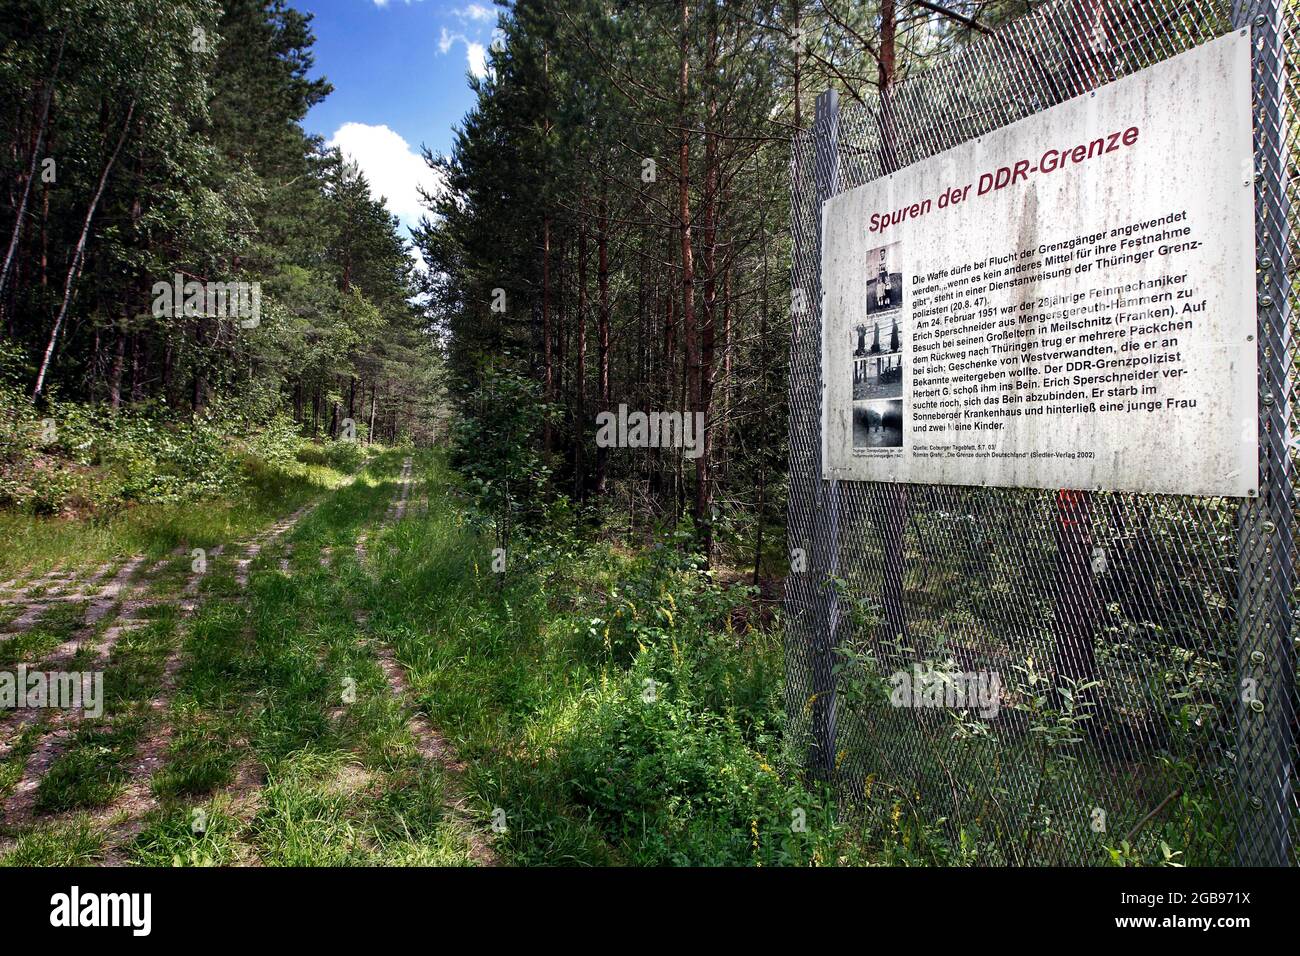 Border fence, expanded metal fence, border signal fence with memorial plaque Traces of GDR history, column trail, hiking trail through woodland in Stock Photo